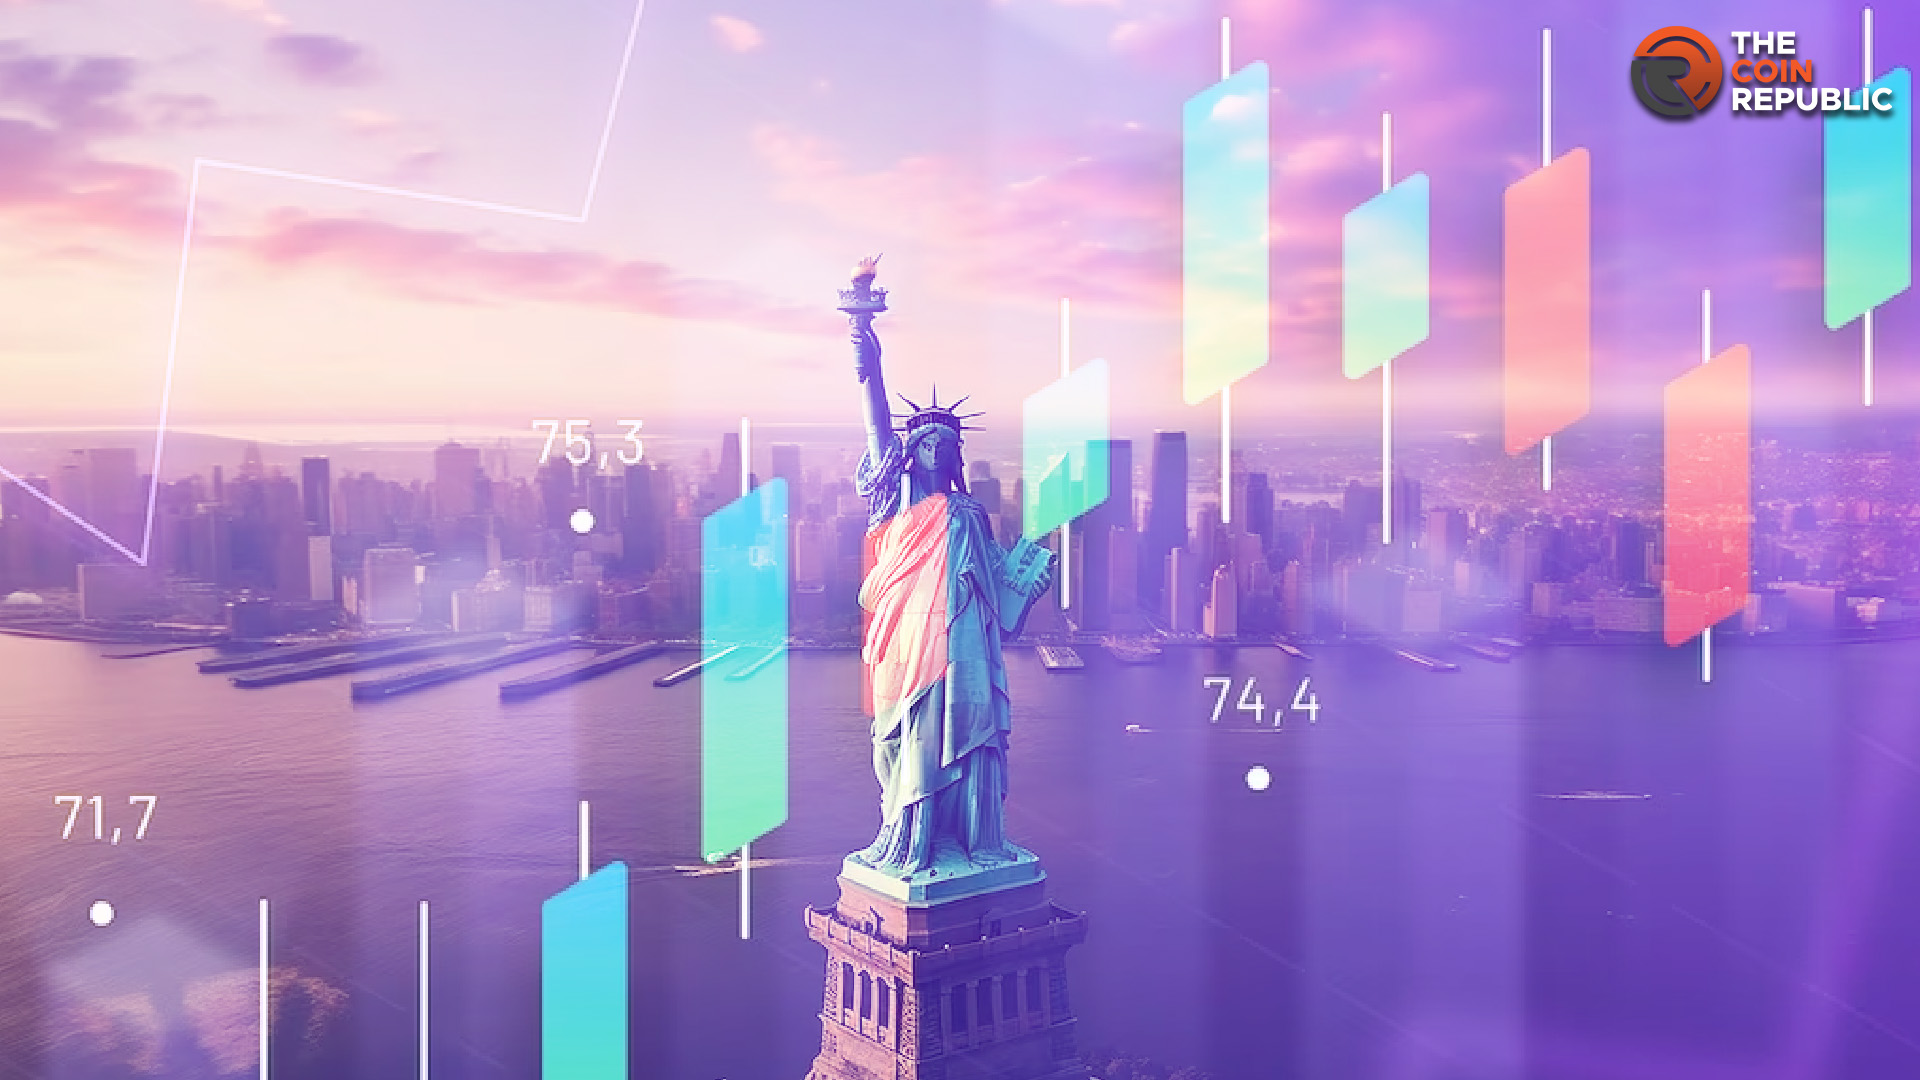 Top 5 Construction Stocks To Frame USA Economy in August 2023